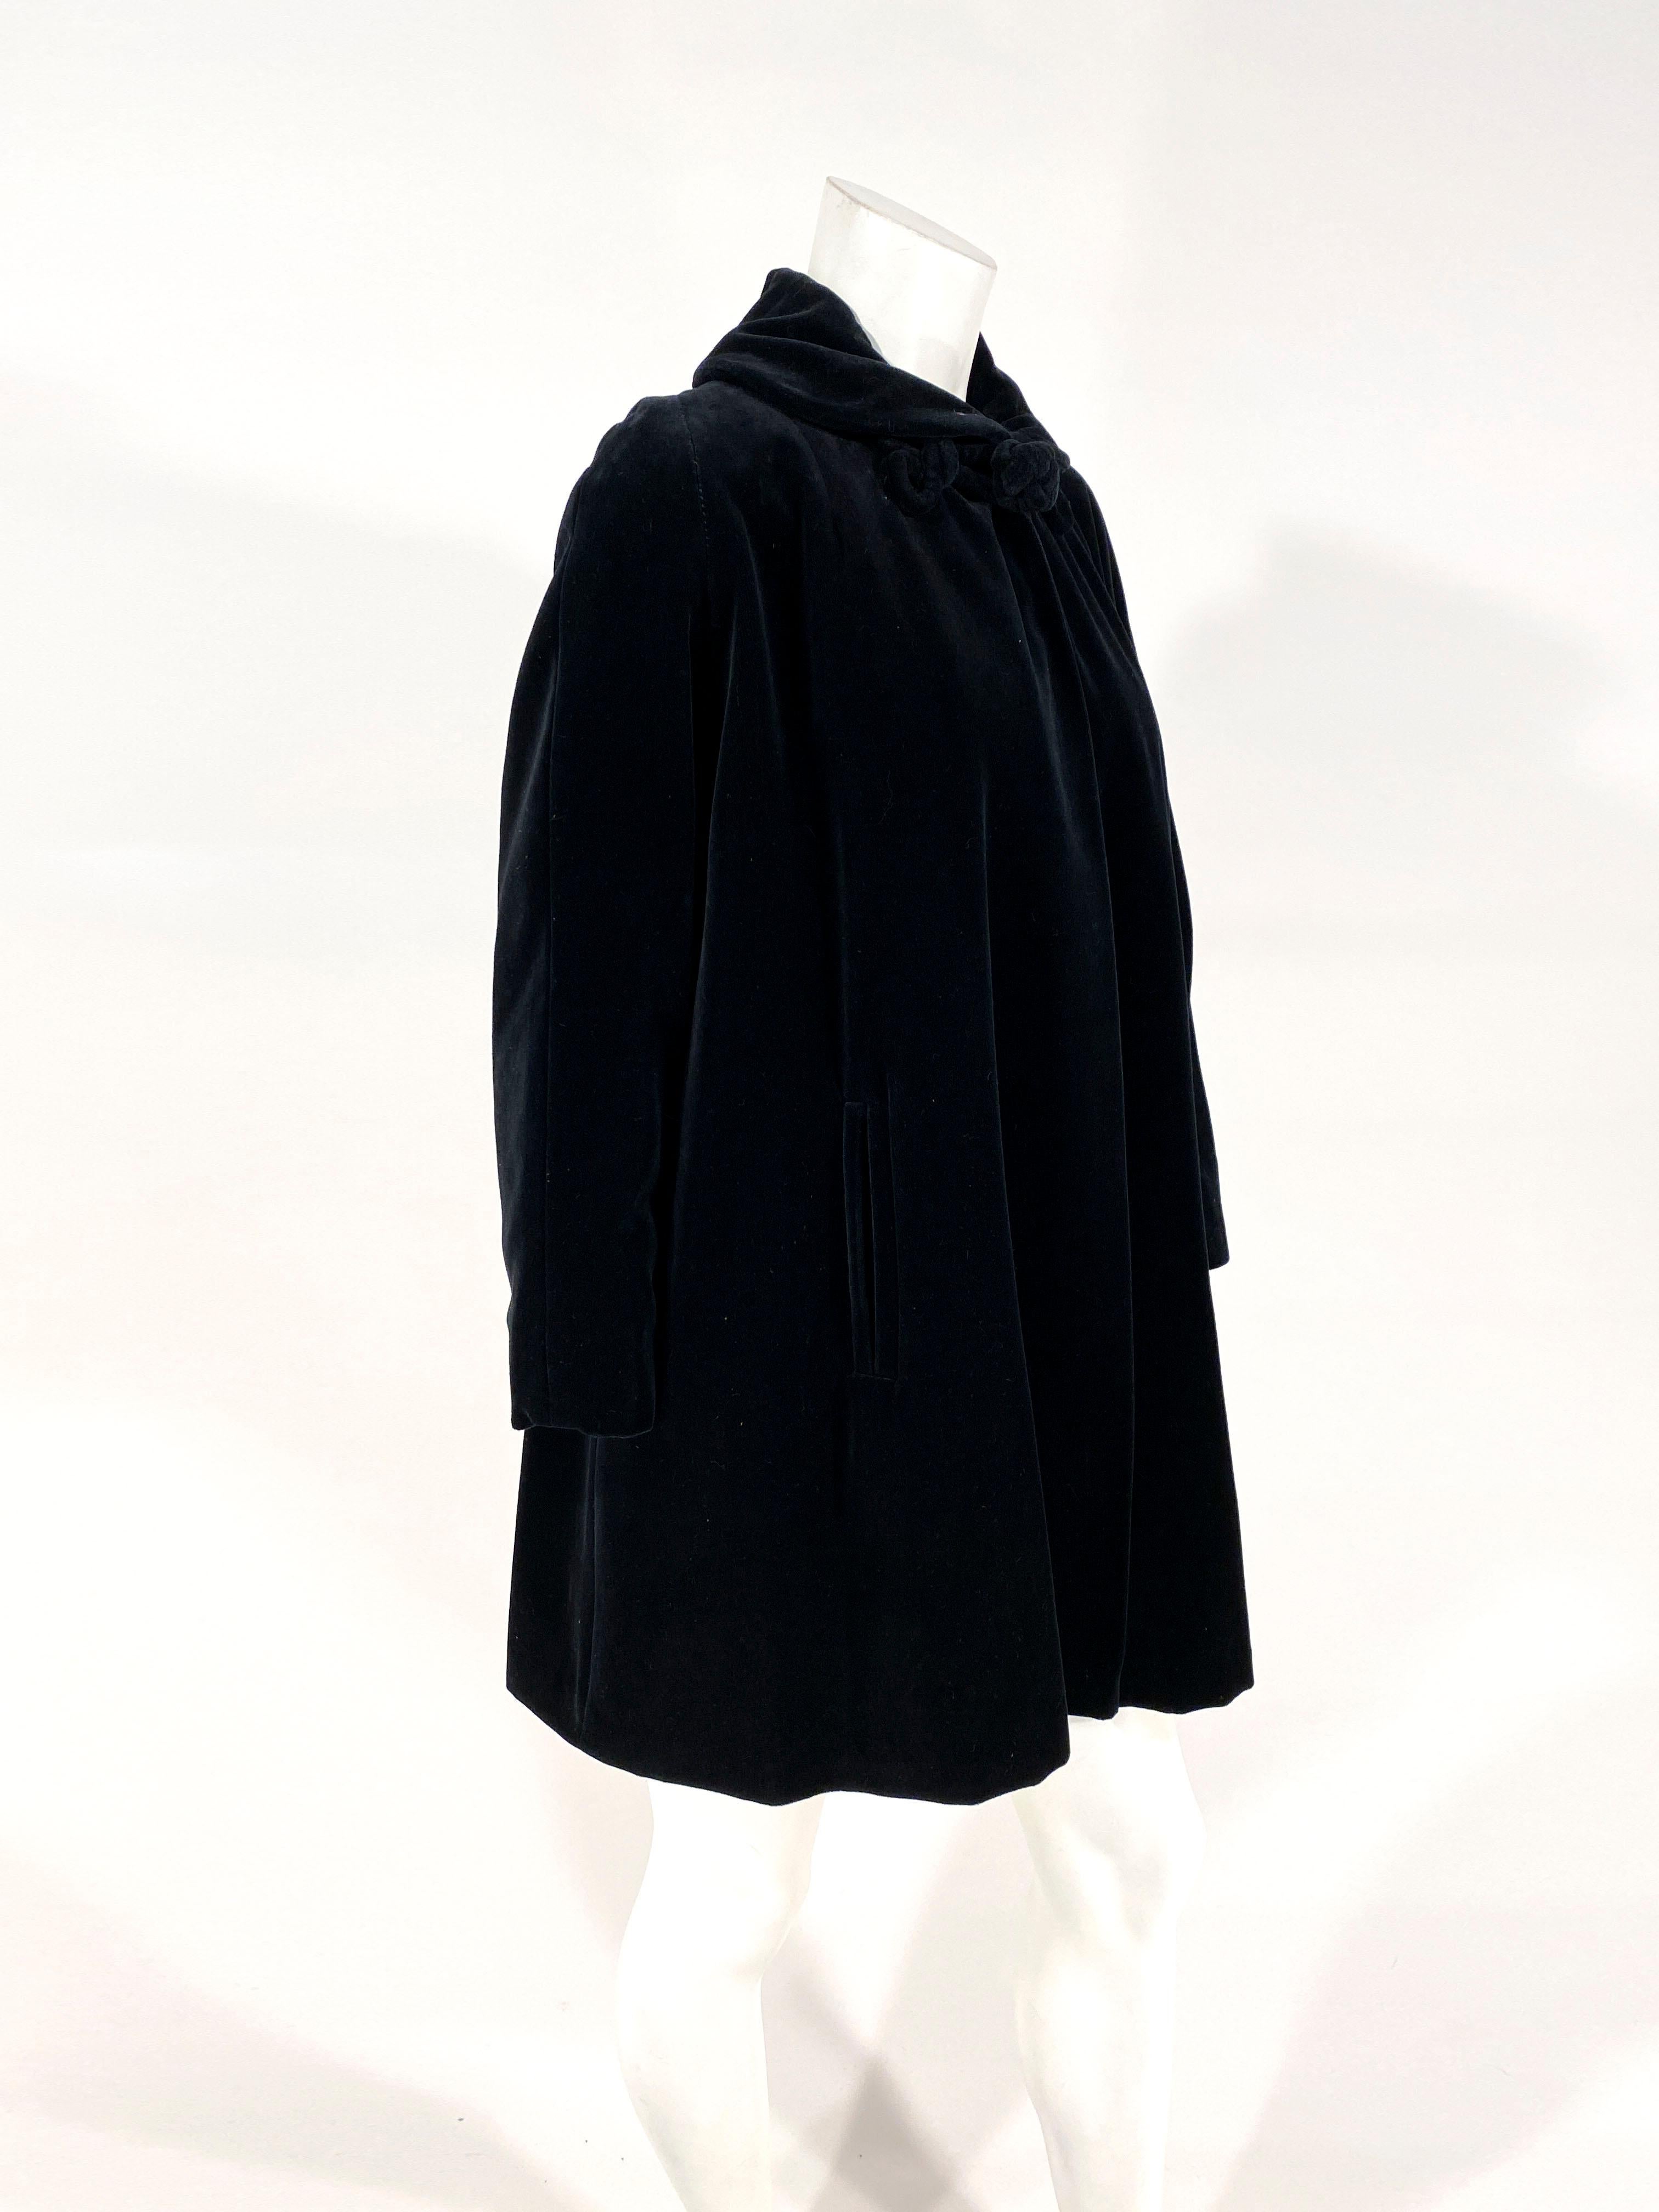 1950s black cotton velvet evening jacket with an A-line shilouette, set-in pockets on both sides, full length sleeves, a peter pan collar and a large handmade corded frog closure on the neckline. The coat is entirely lined in a black twill. 